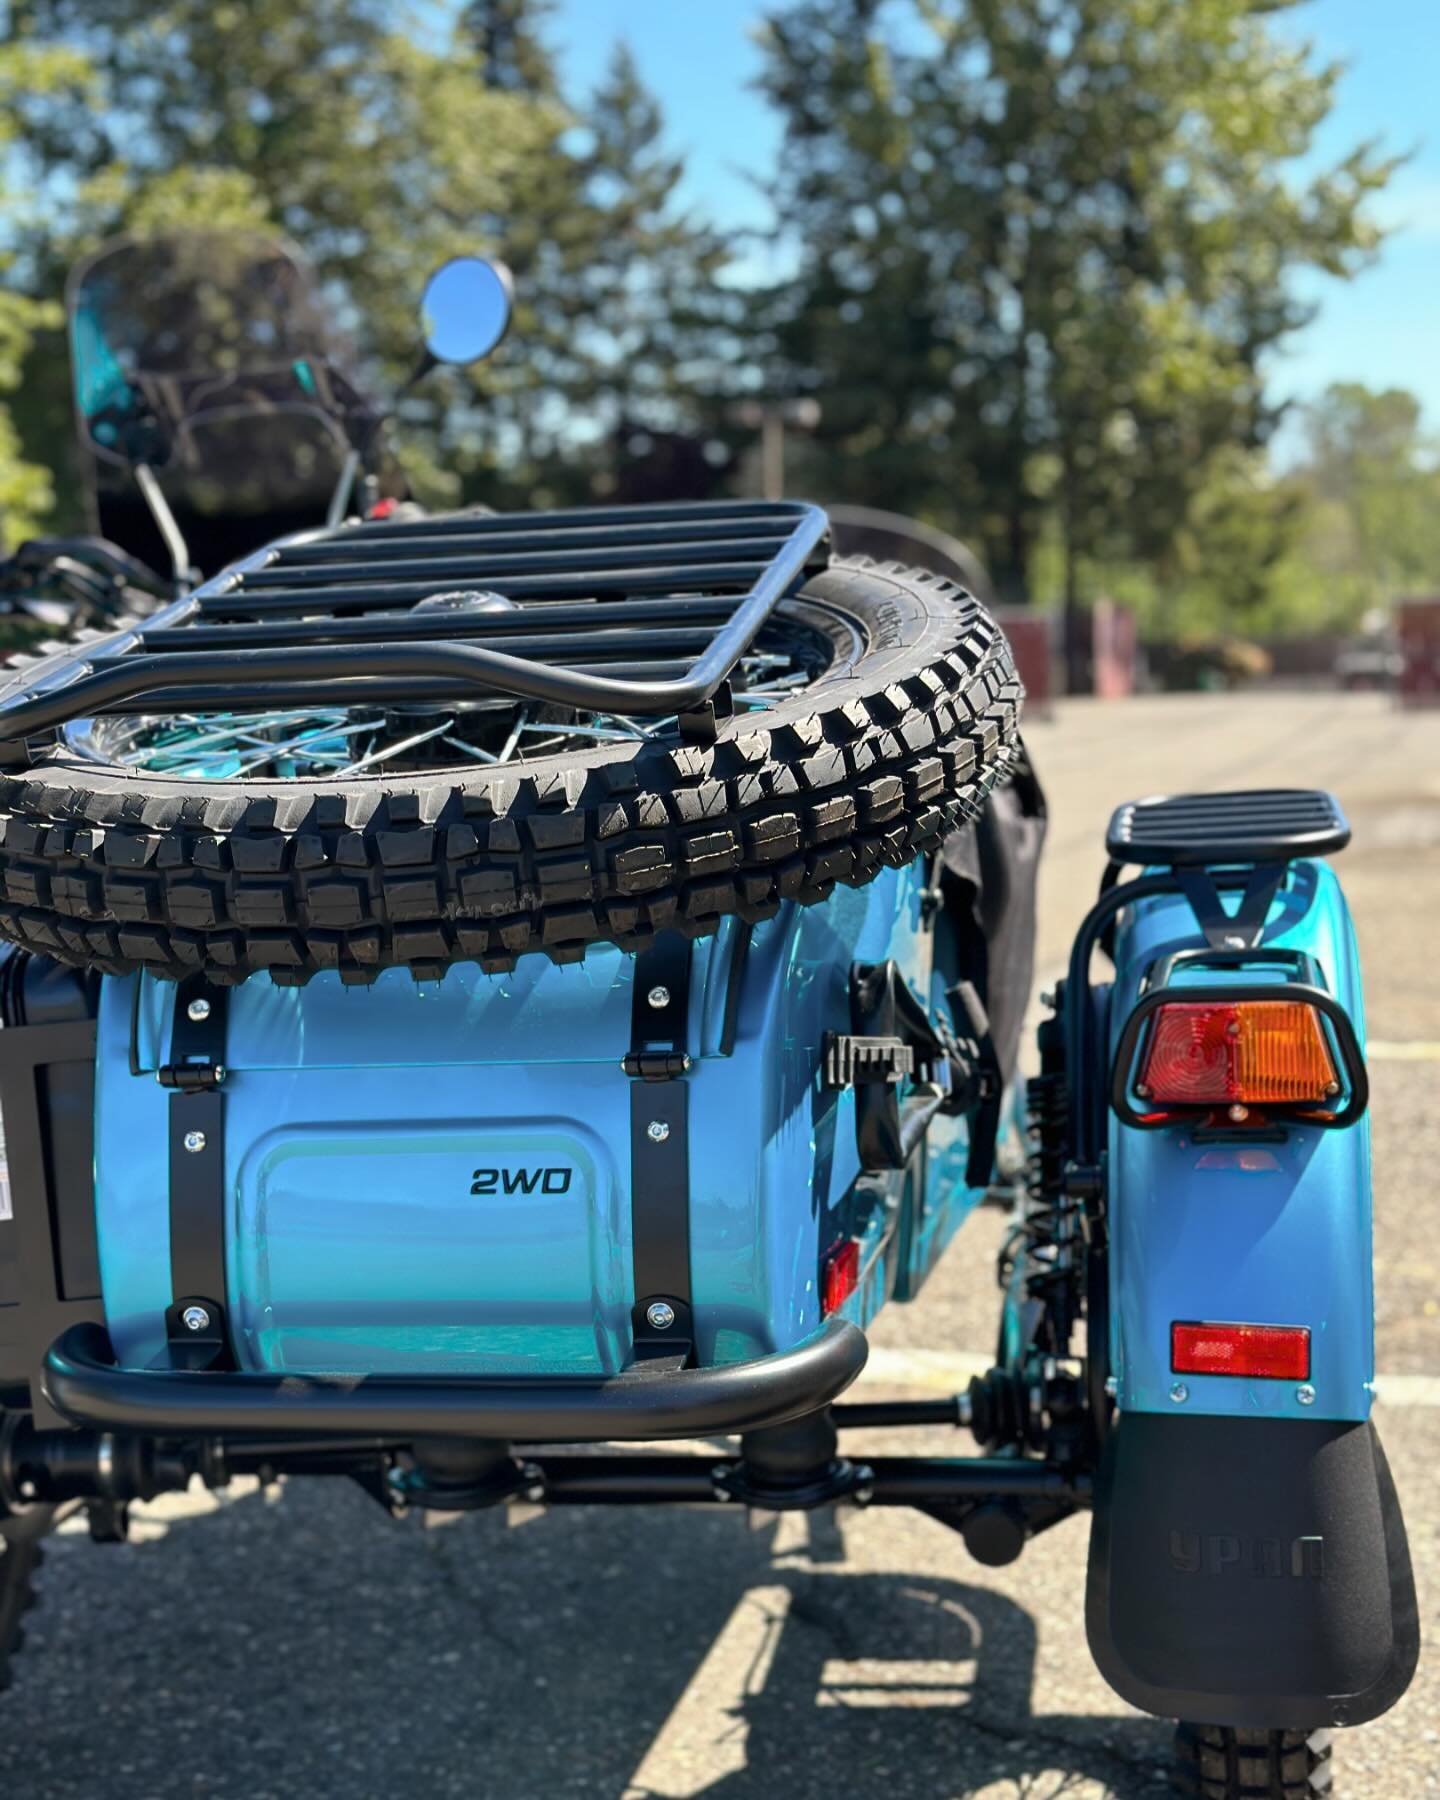 Caribbean Blue going home today 🌞  #uralmotorcycles